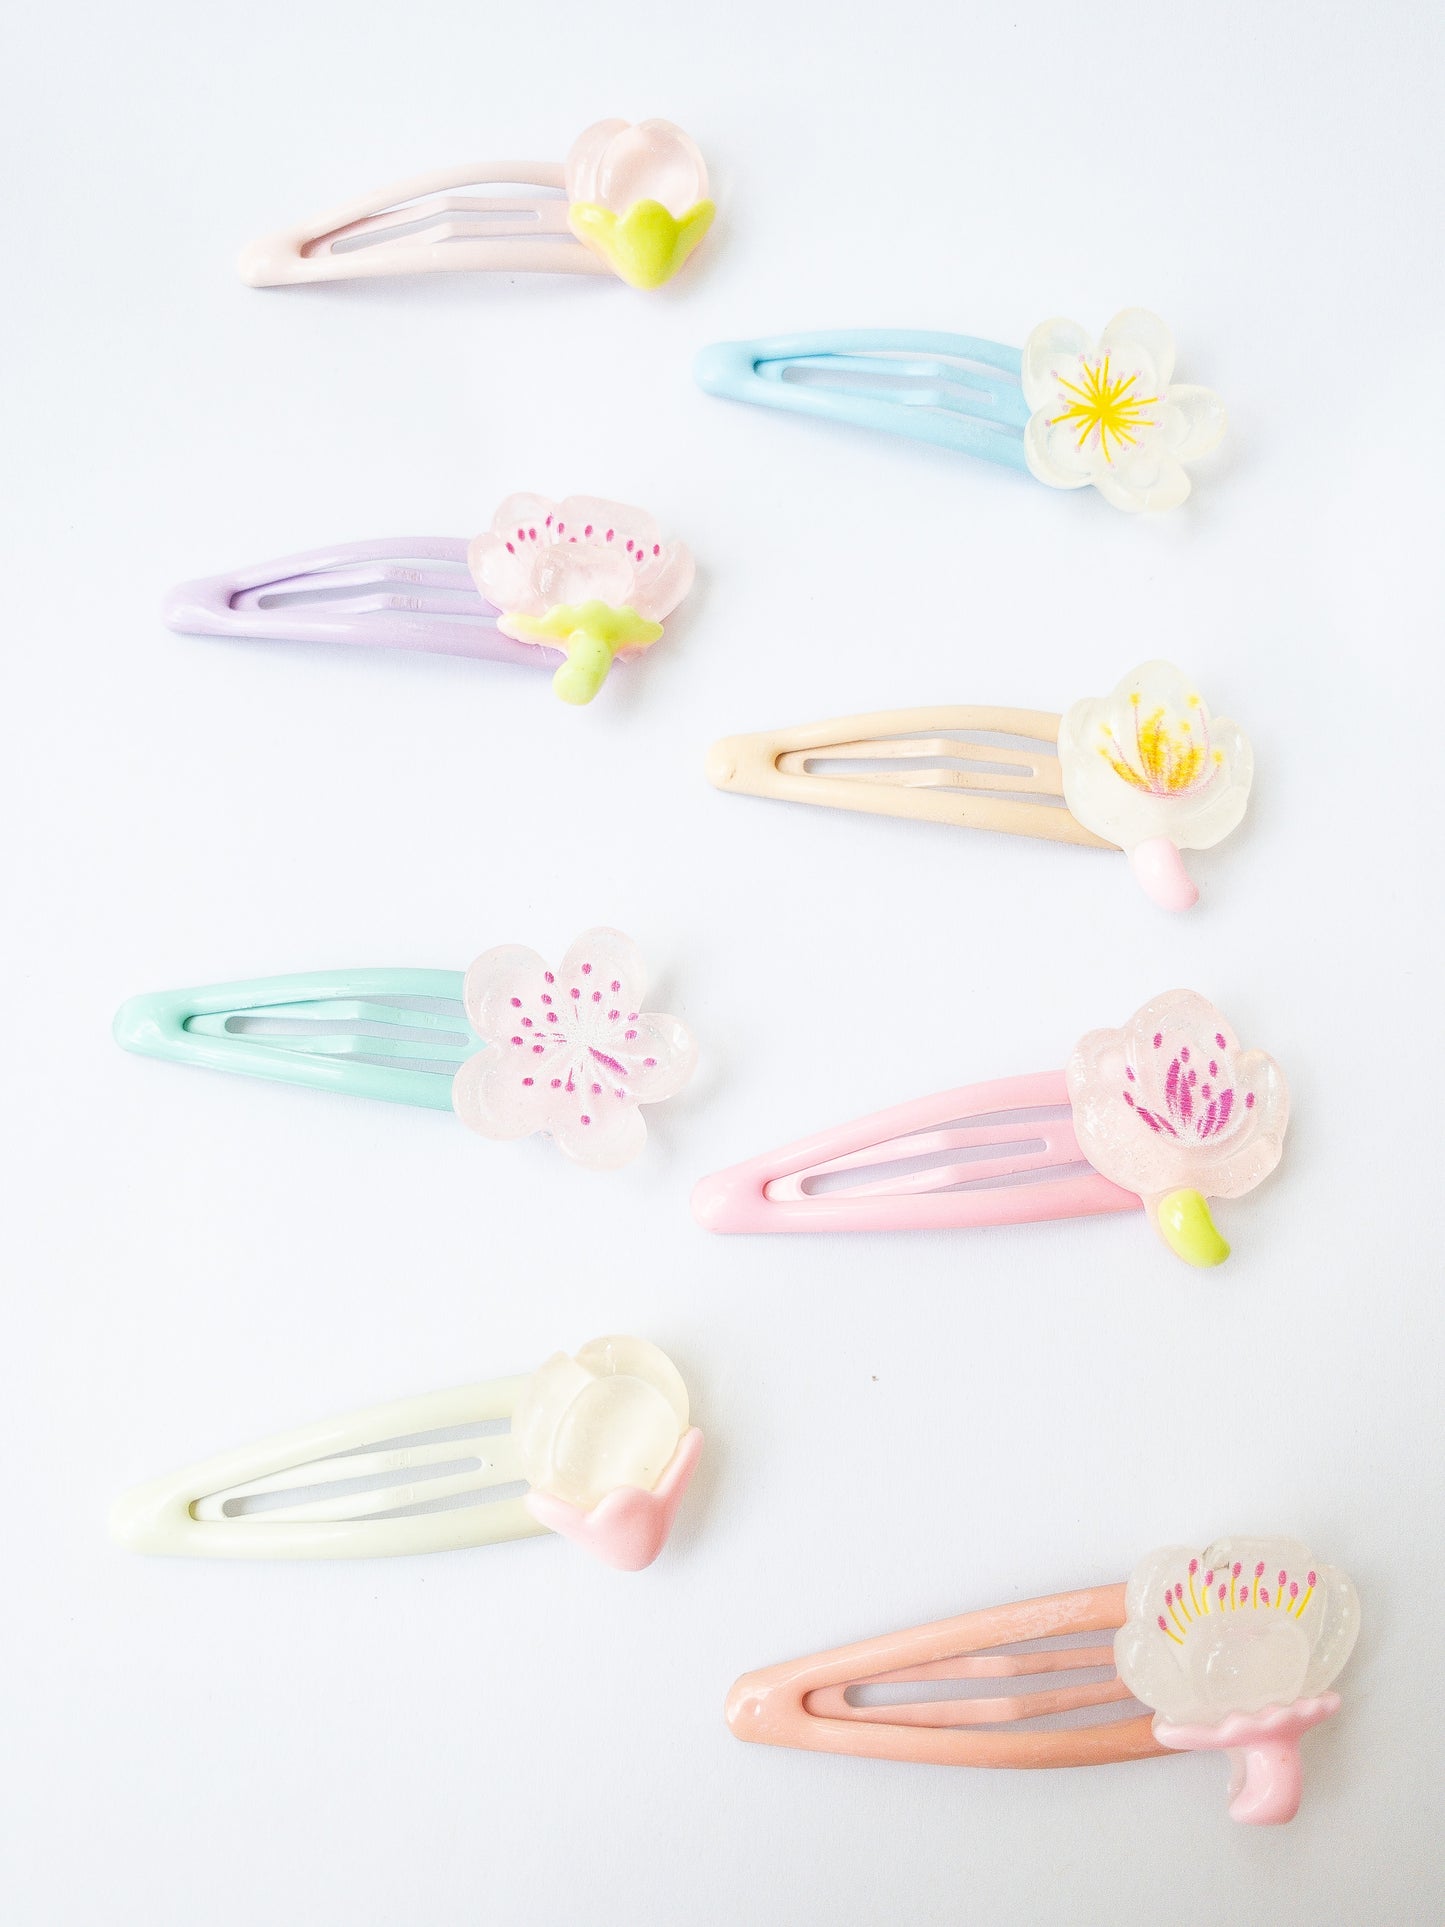 A set of 8 soft and beautiful glittery flowers! Each colorful, painted snap clip has a flower charm attached to it and are so easy to clip o